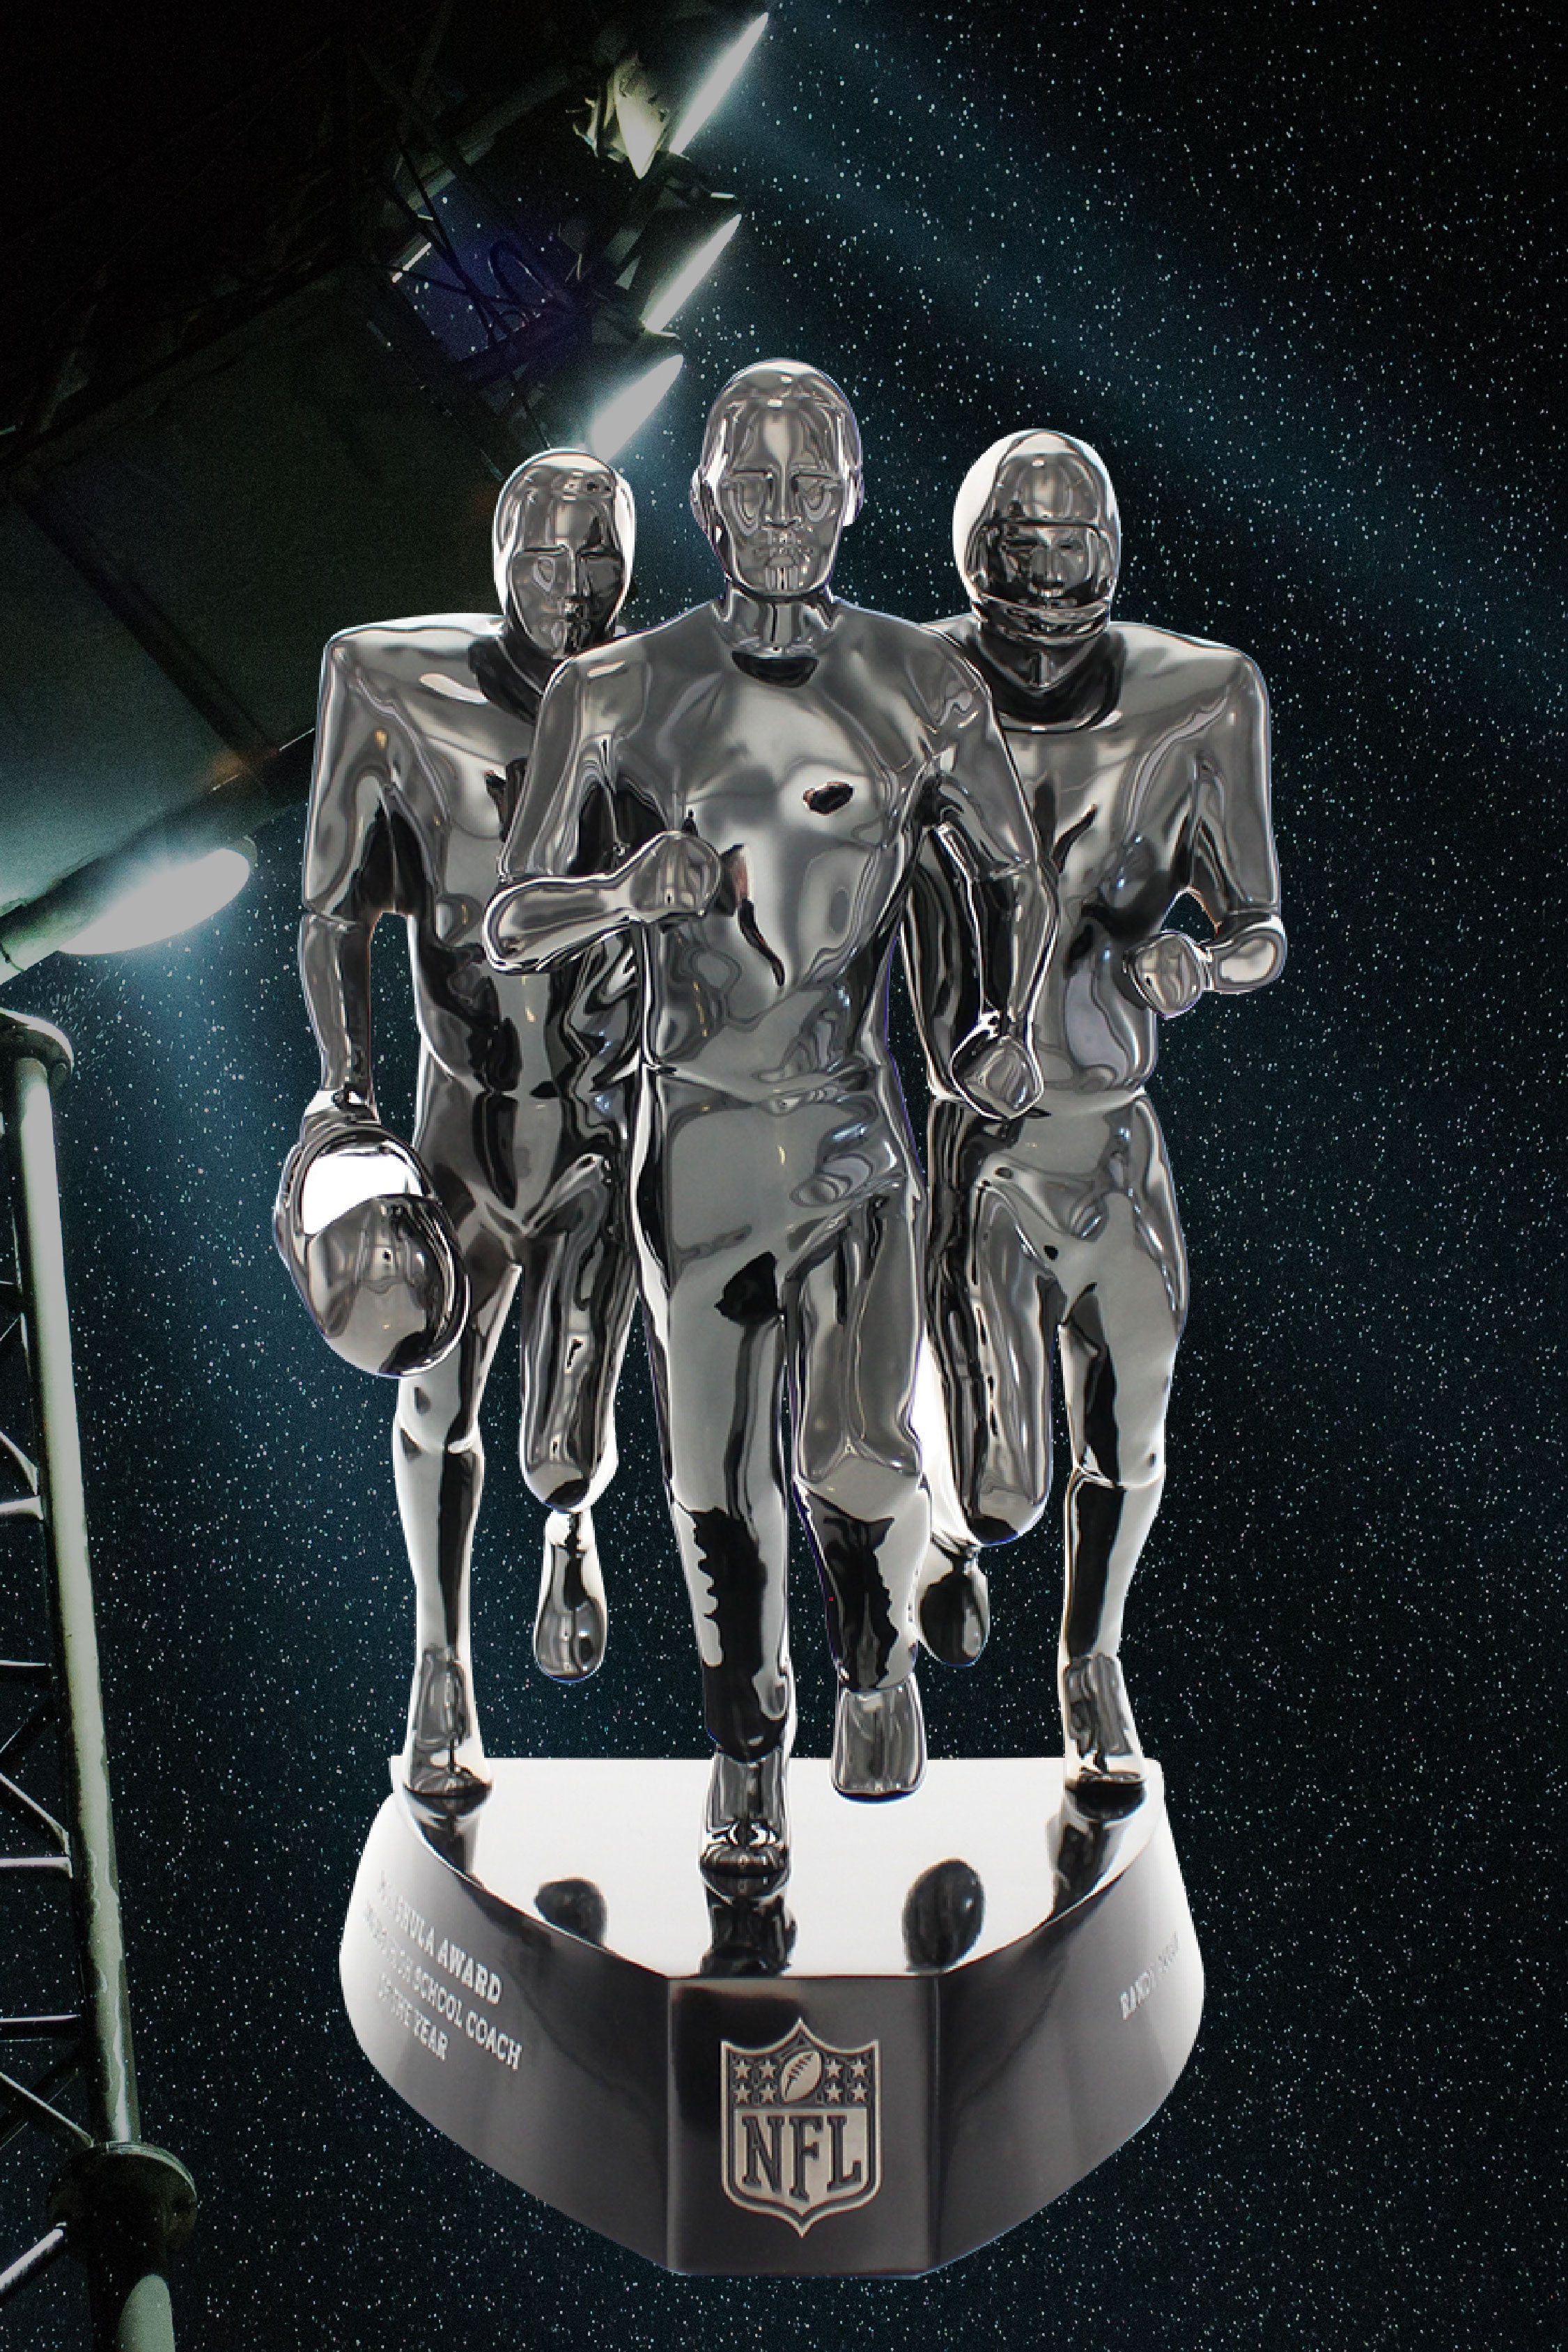 Front view, NFL Don Shula trophy superimposed over football stadium lights. Award has 3 metal figures in running pose